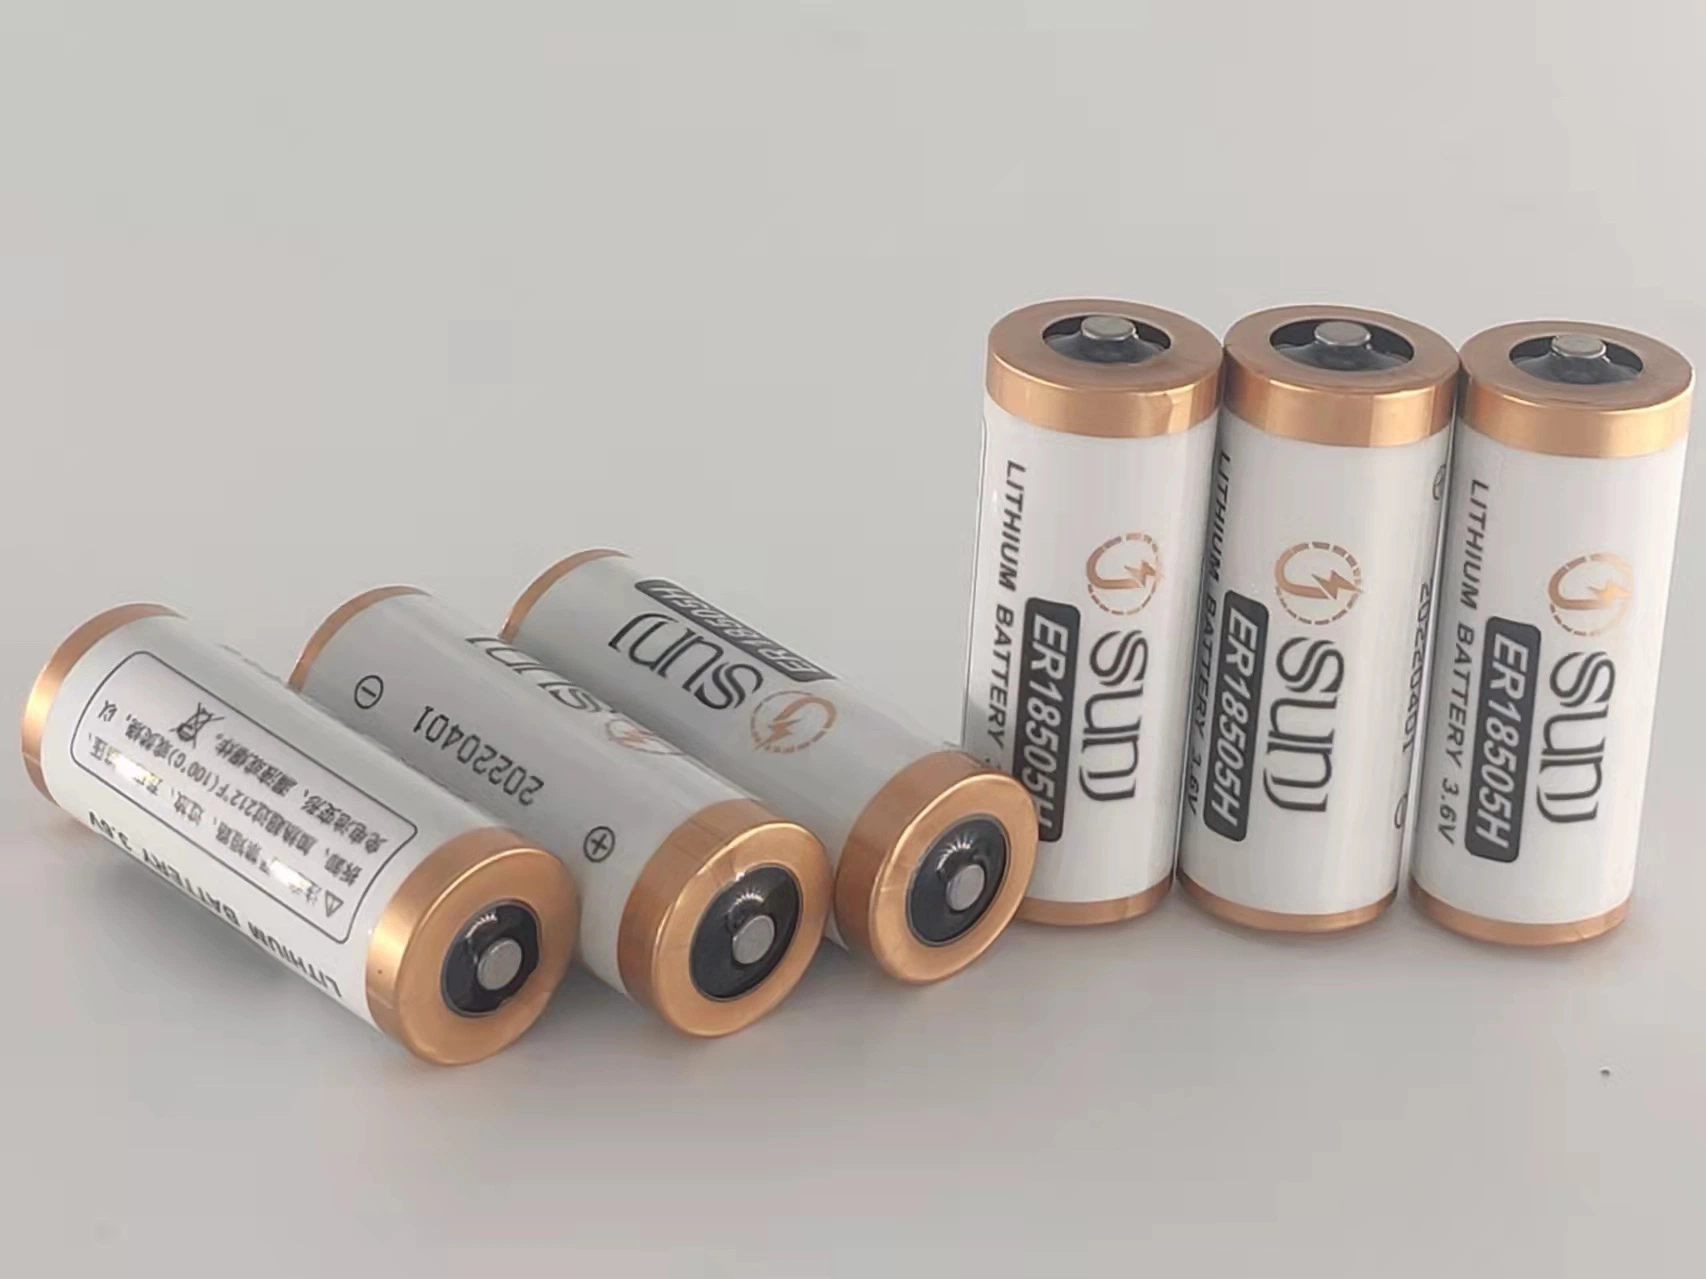 Er18505 Cylindrical Used for Consumer Electronics Non Rechargeable High Capacity 4000mAh 3.6V Lithium Battery Sunj